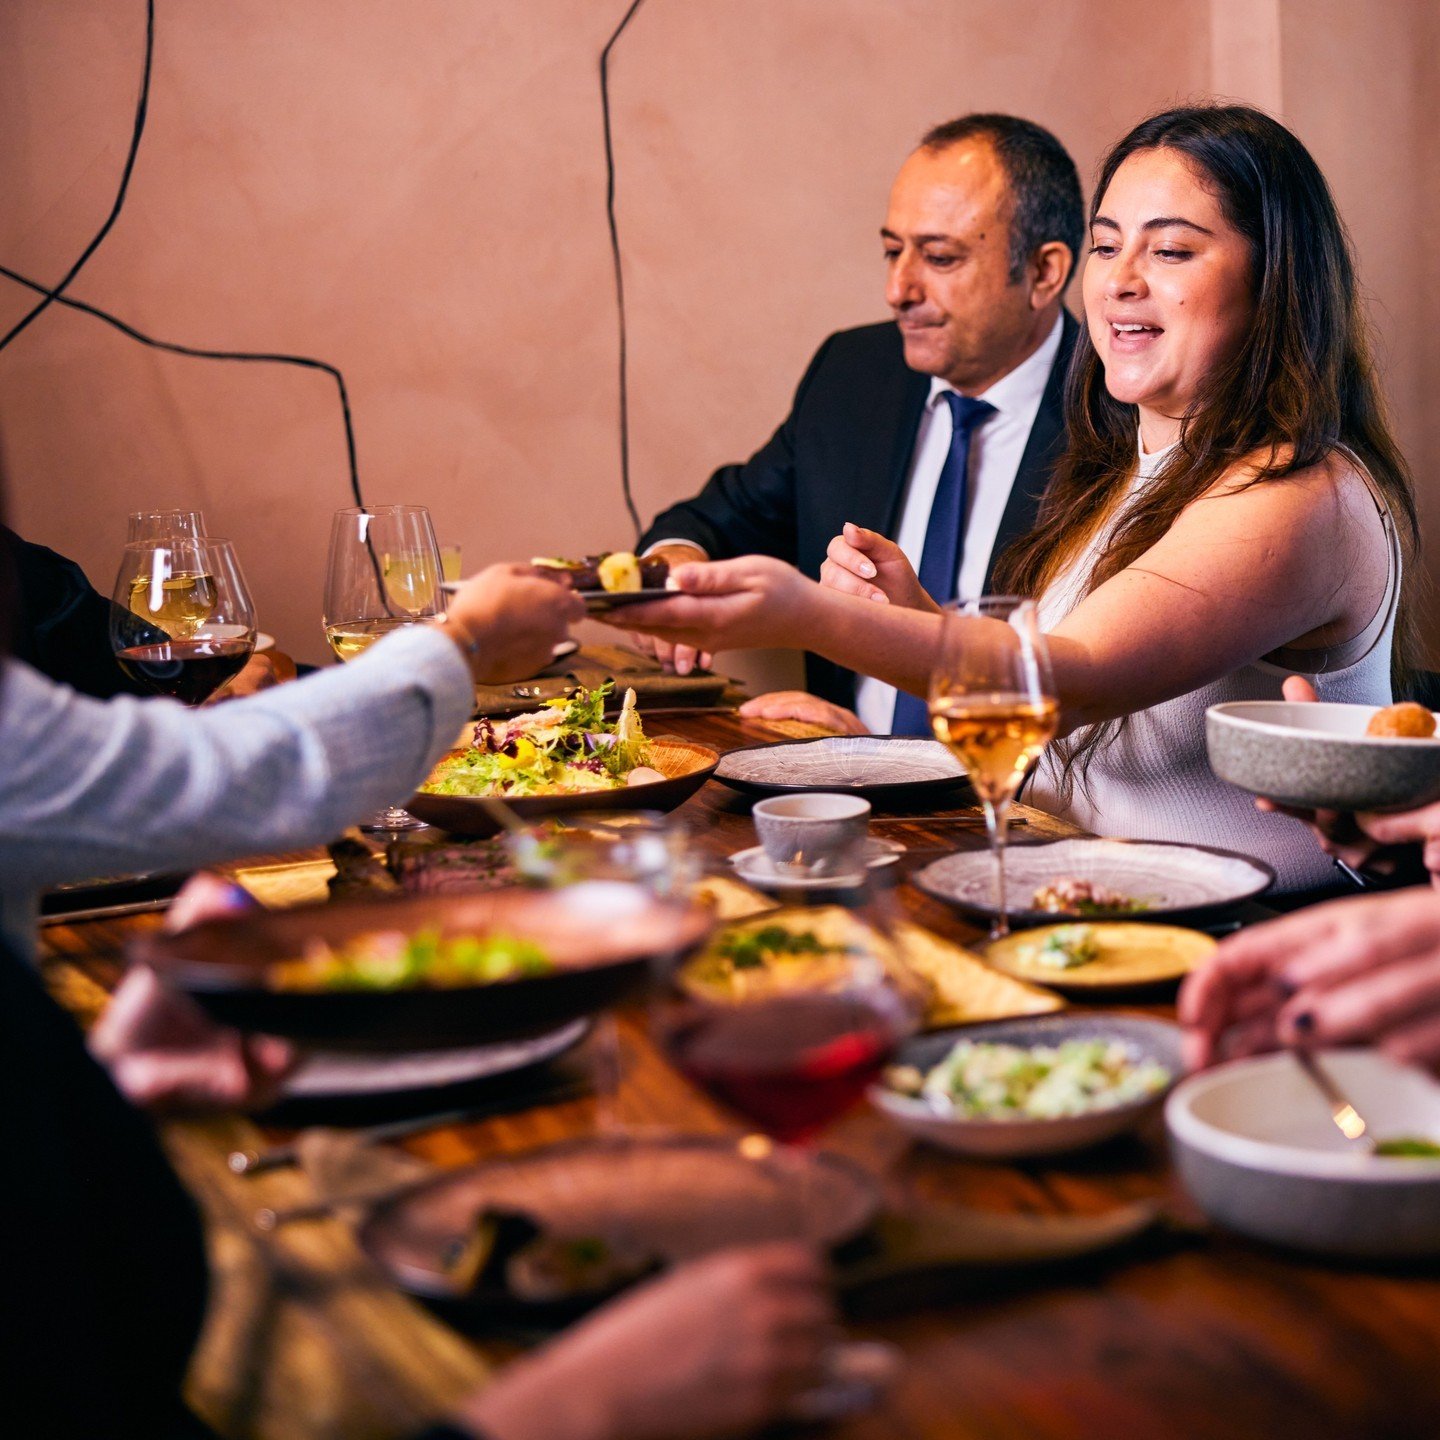 At Sekoya, we want to be more than just a restaurant; we're a gathering place where connections are made and laughter is shared. 
Our team would be honored to help you plan the perfect evening at Sekoya. From intimate gatherings to grand celebrations